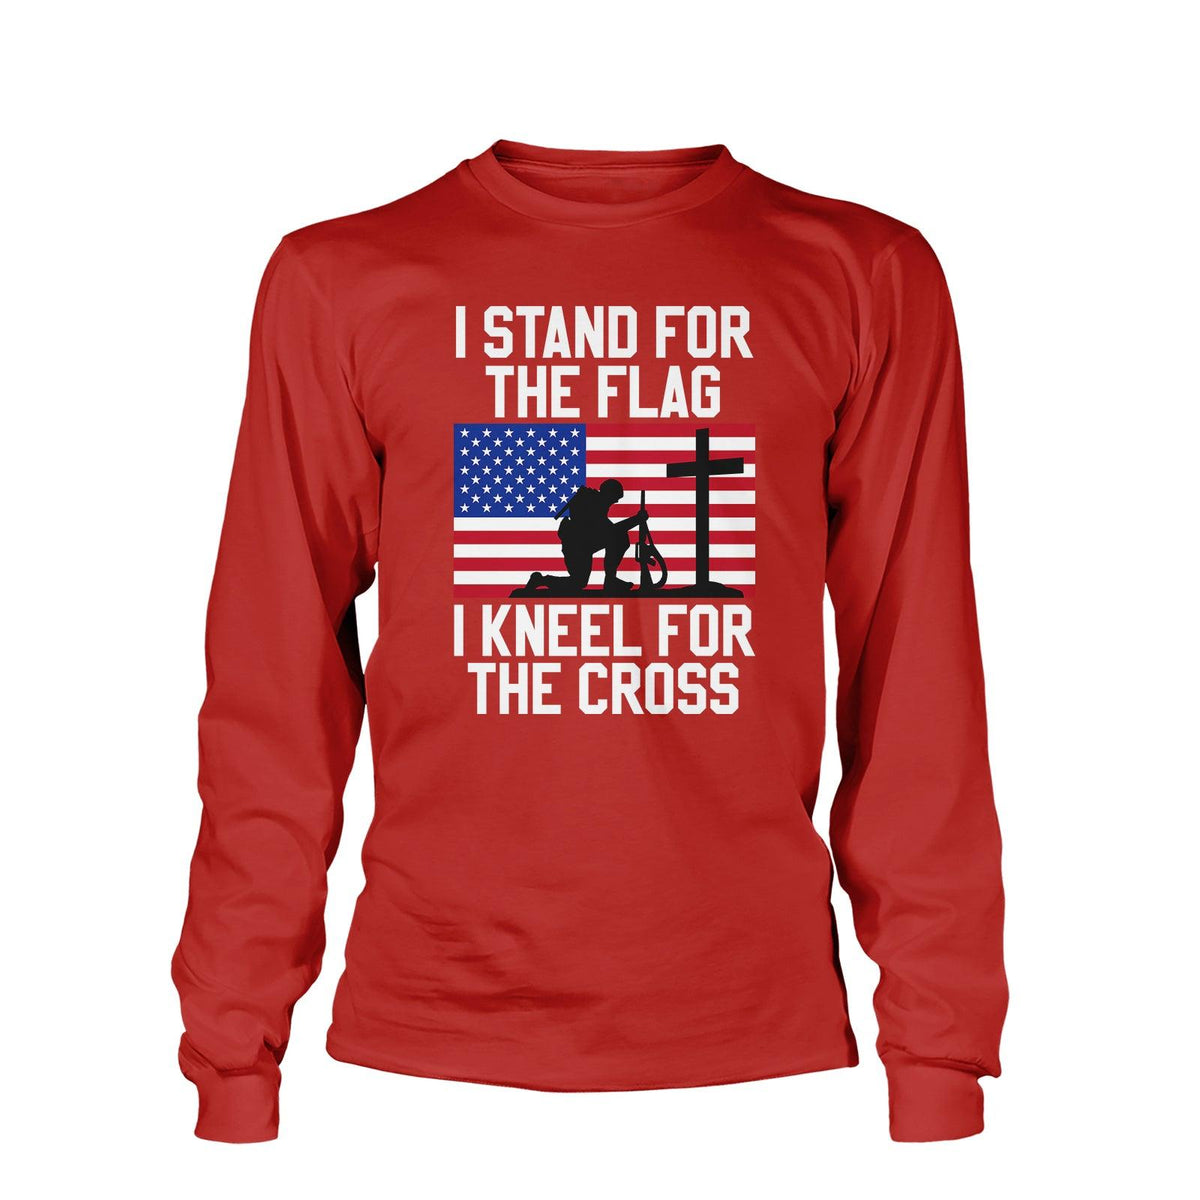 I Stand for the Flag Long Sleeve T-Shirt - Our True God